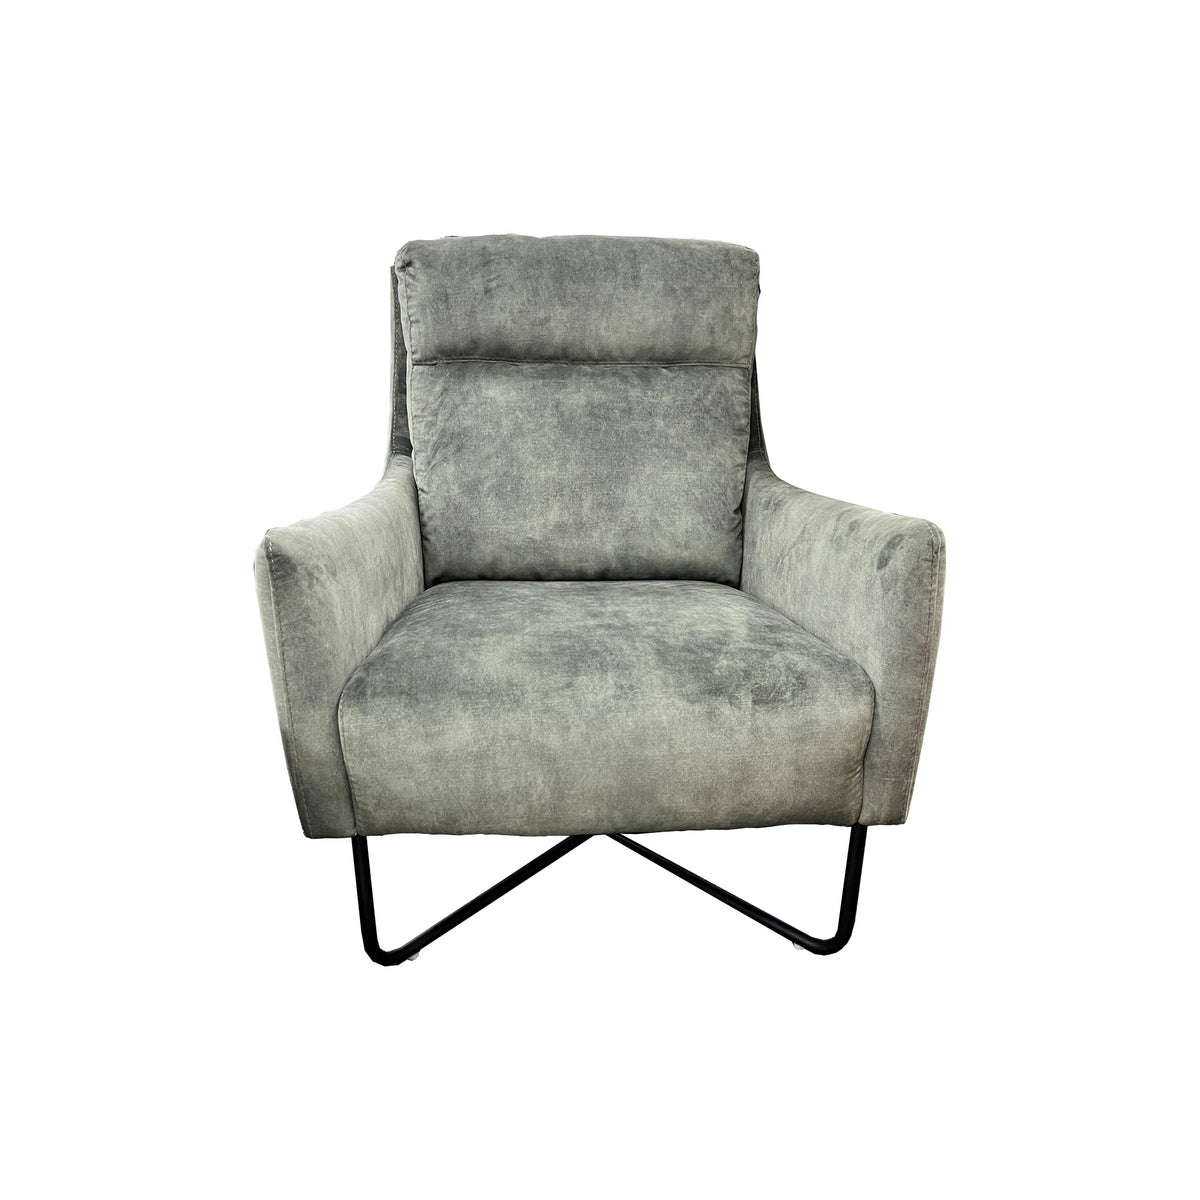 Trento Occasional Chair - Olive Green